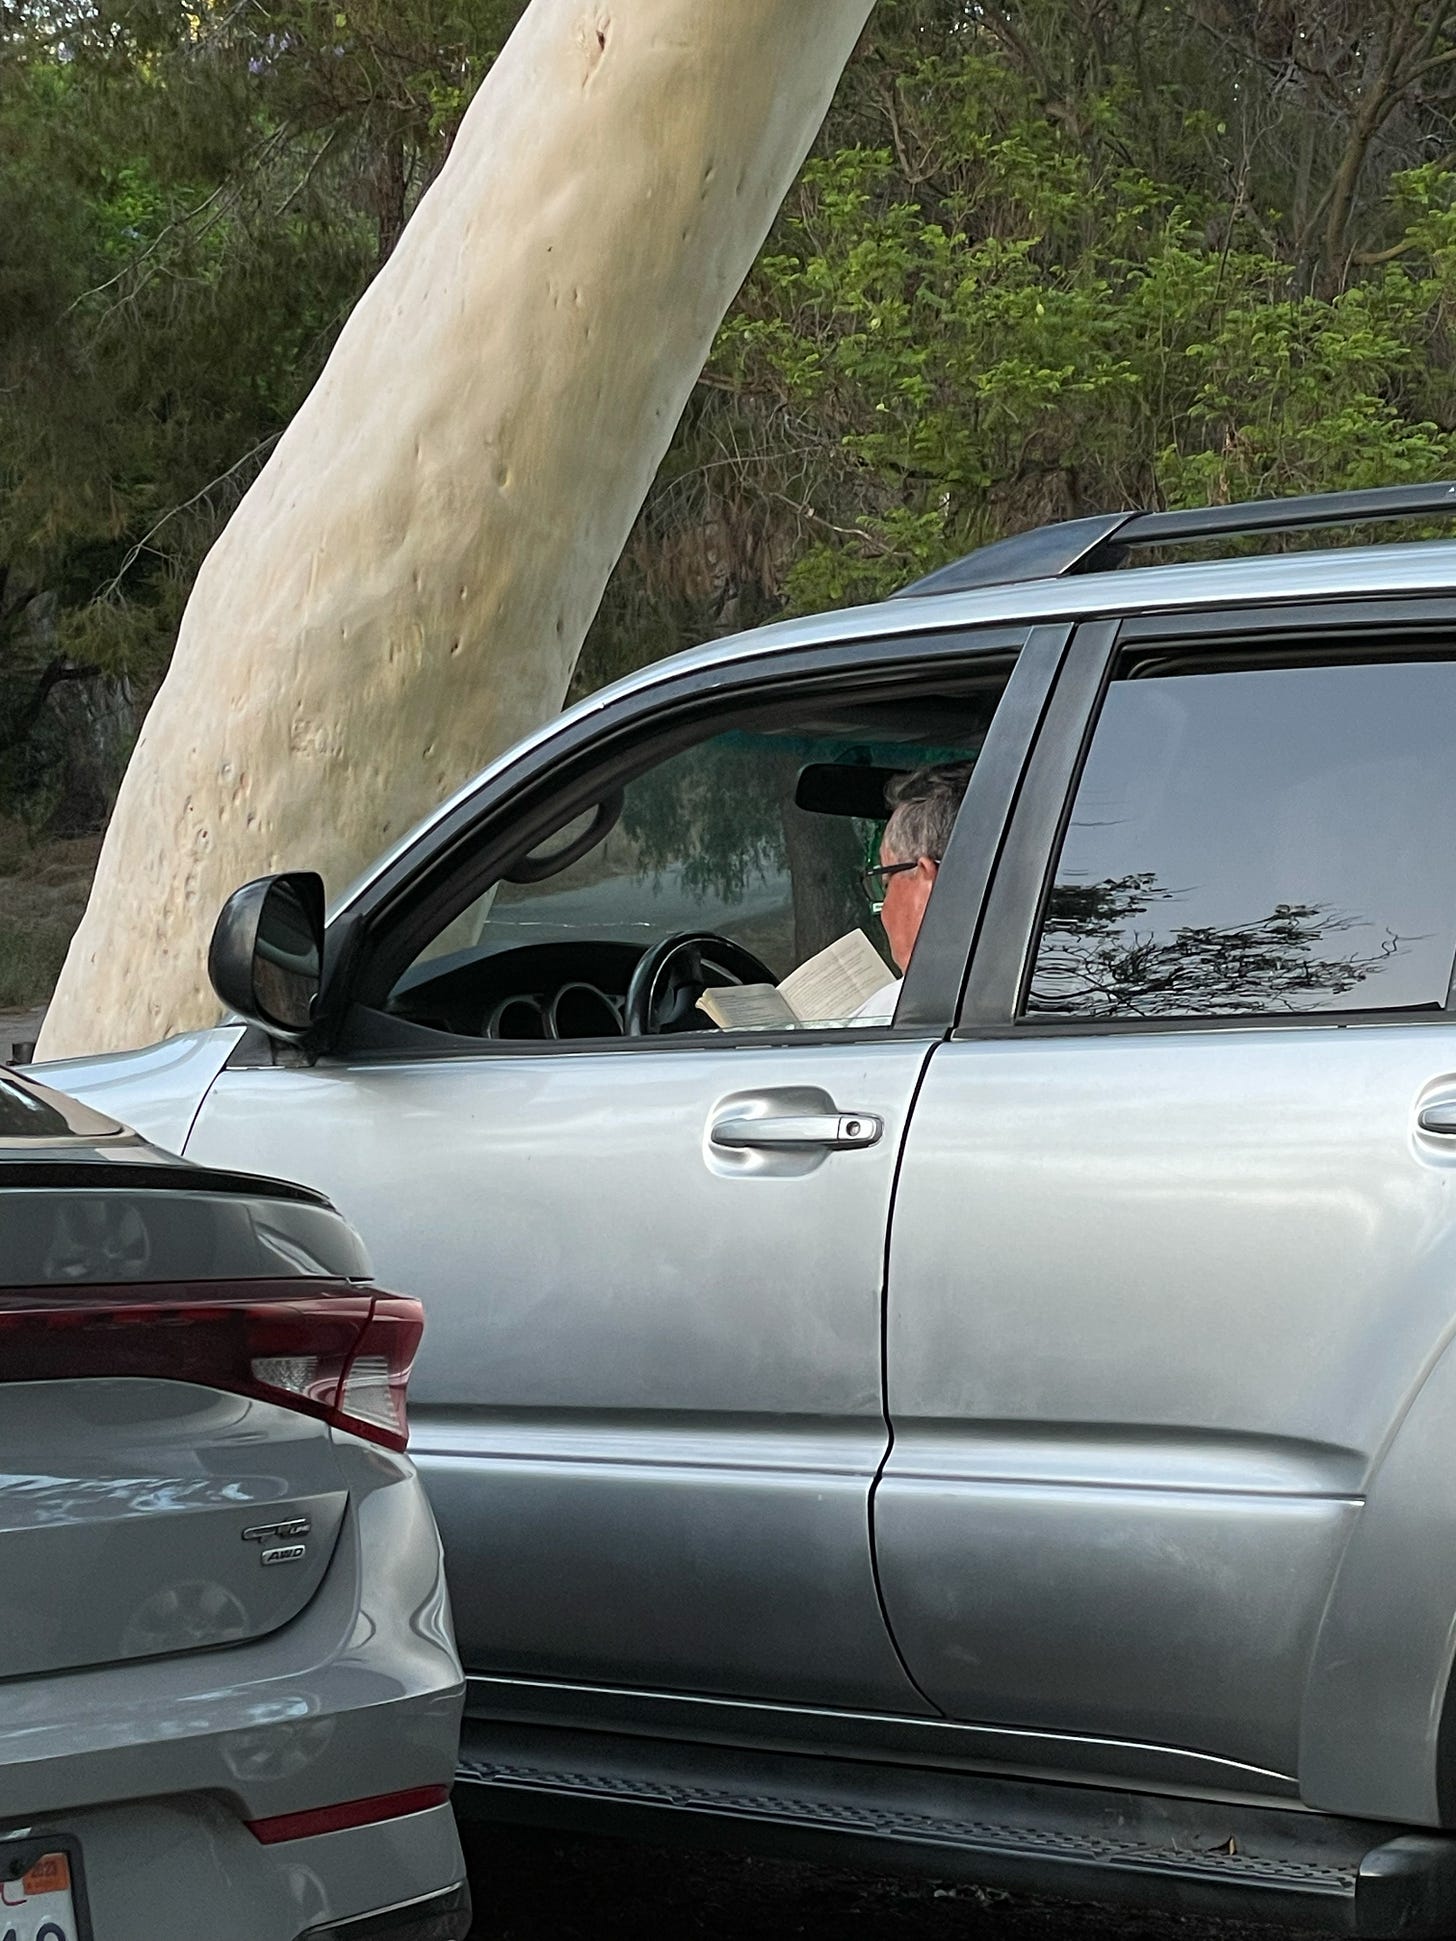 Bespectacled man reading a book in his car with the window open.